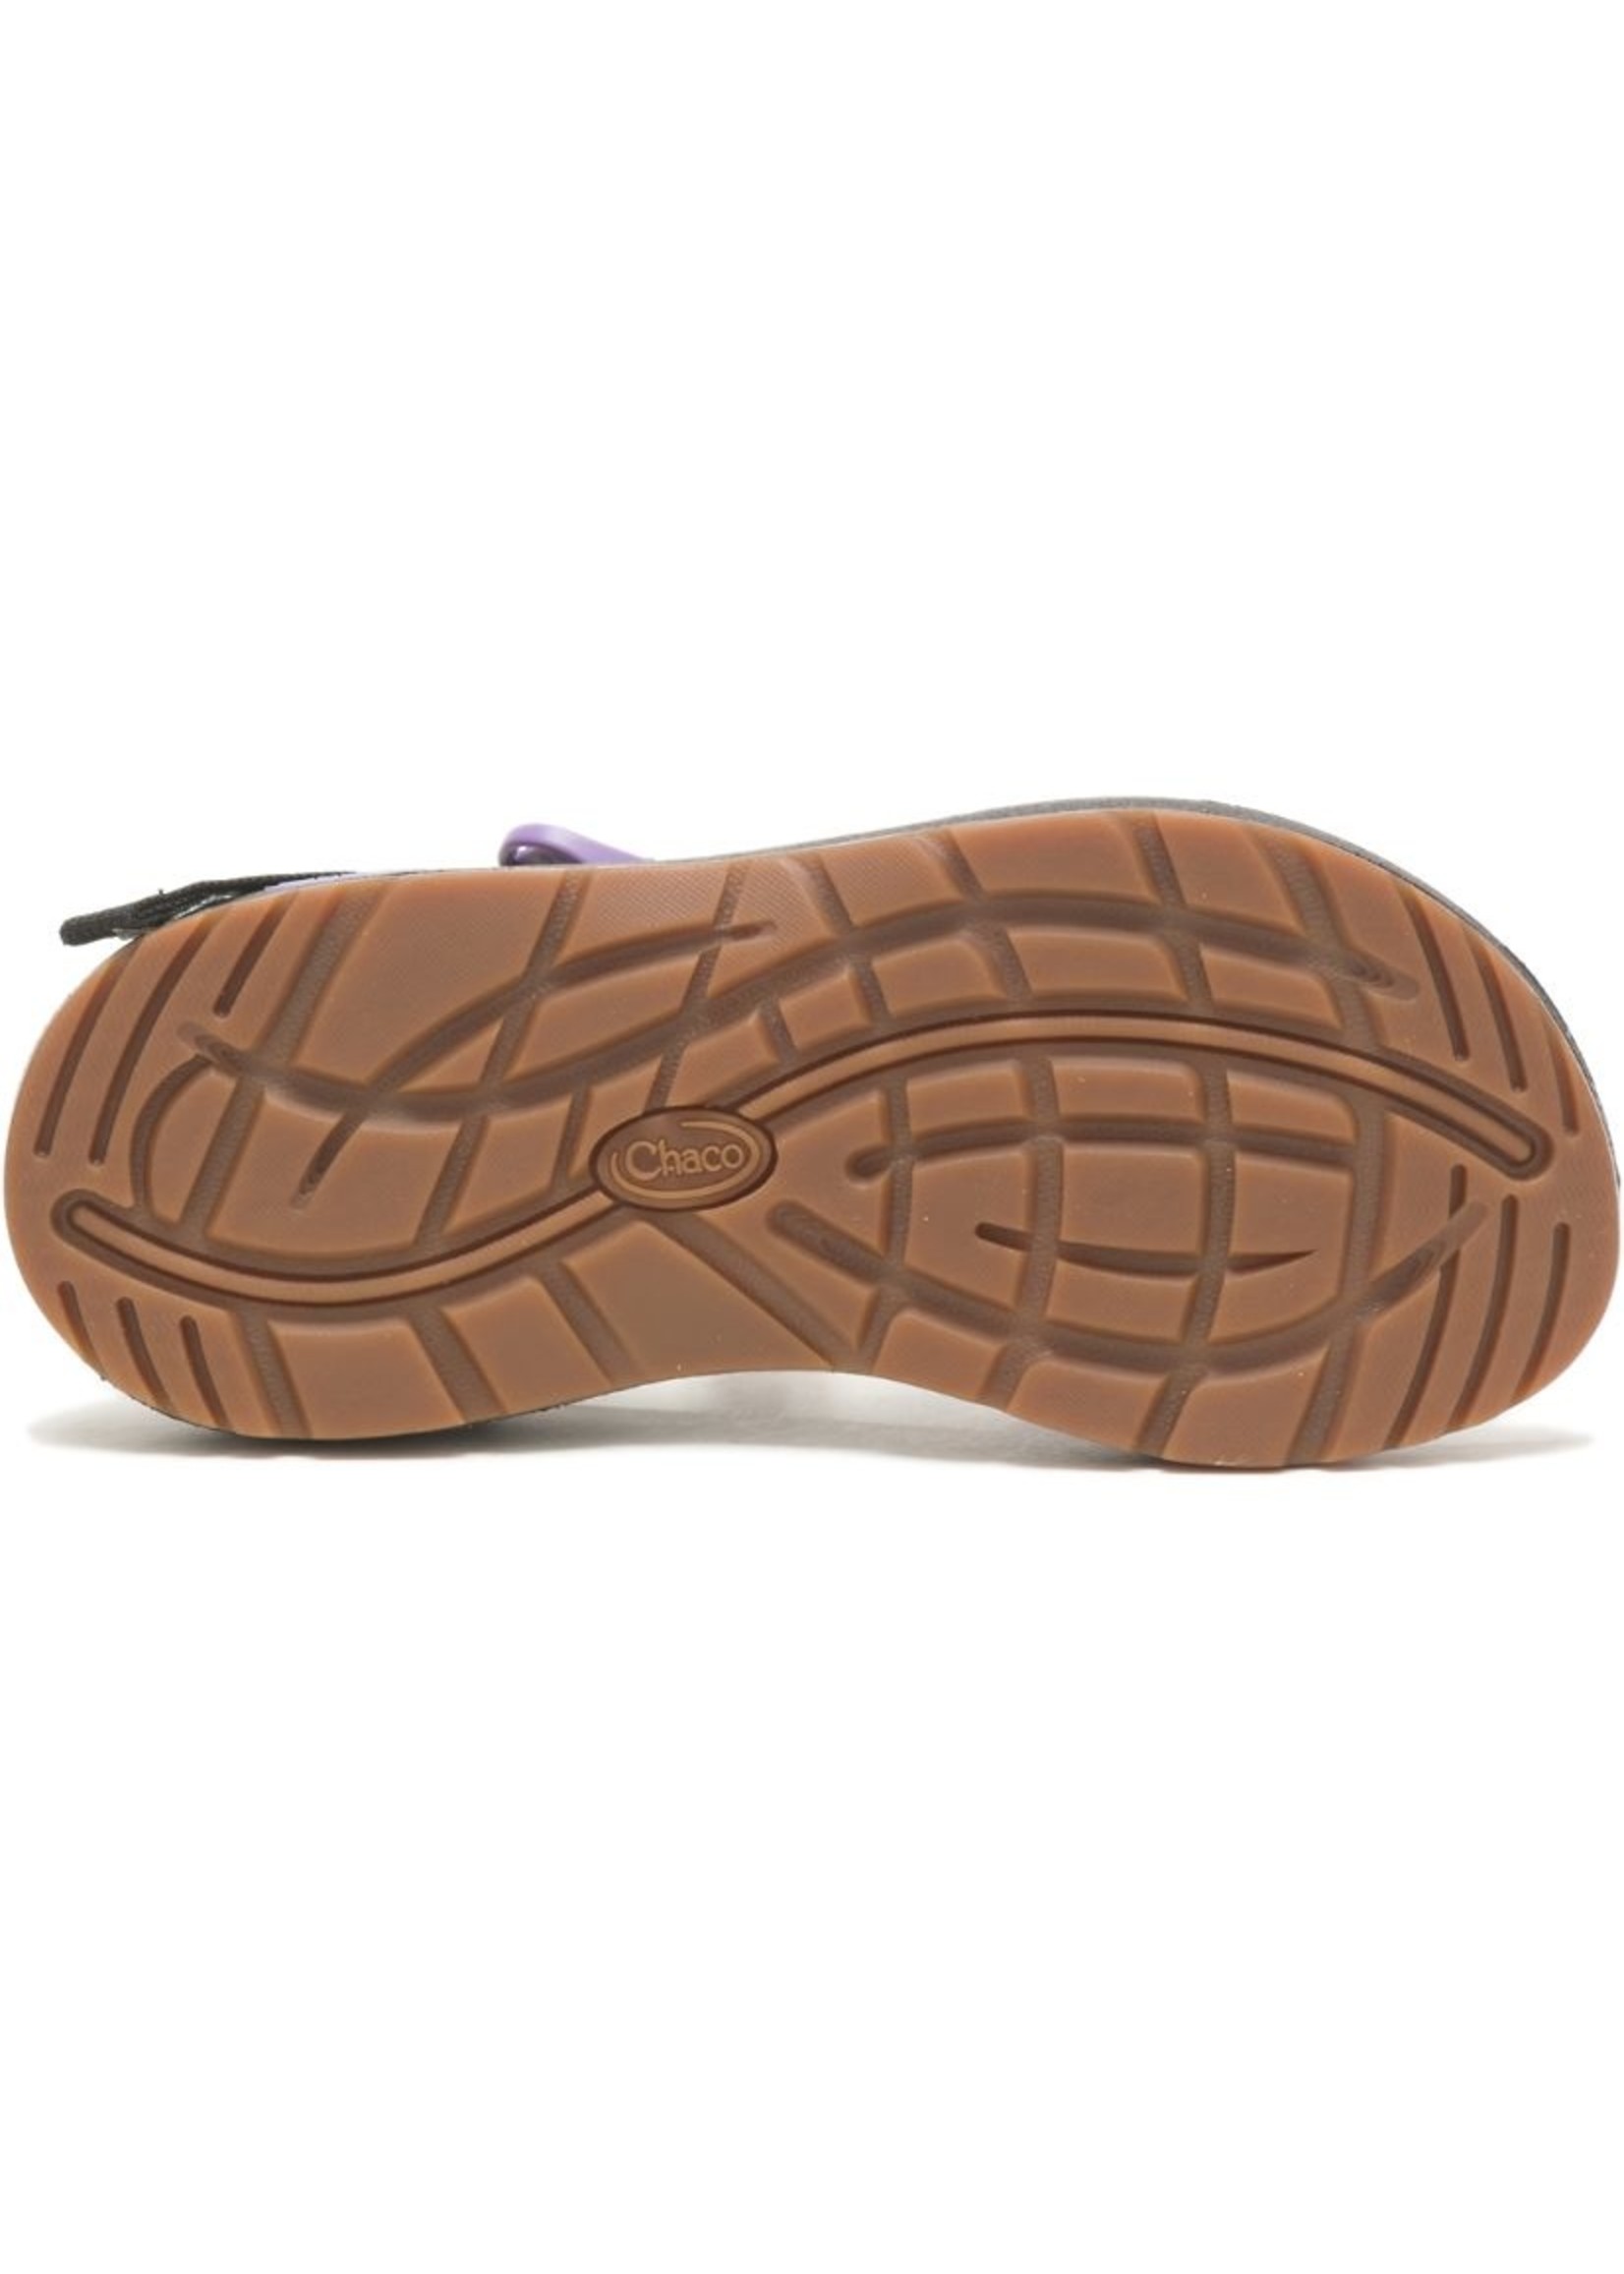 Chaco Womens Zcloud 2 Wily Violet